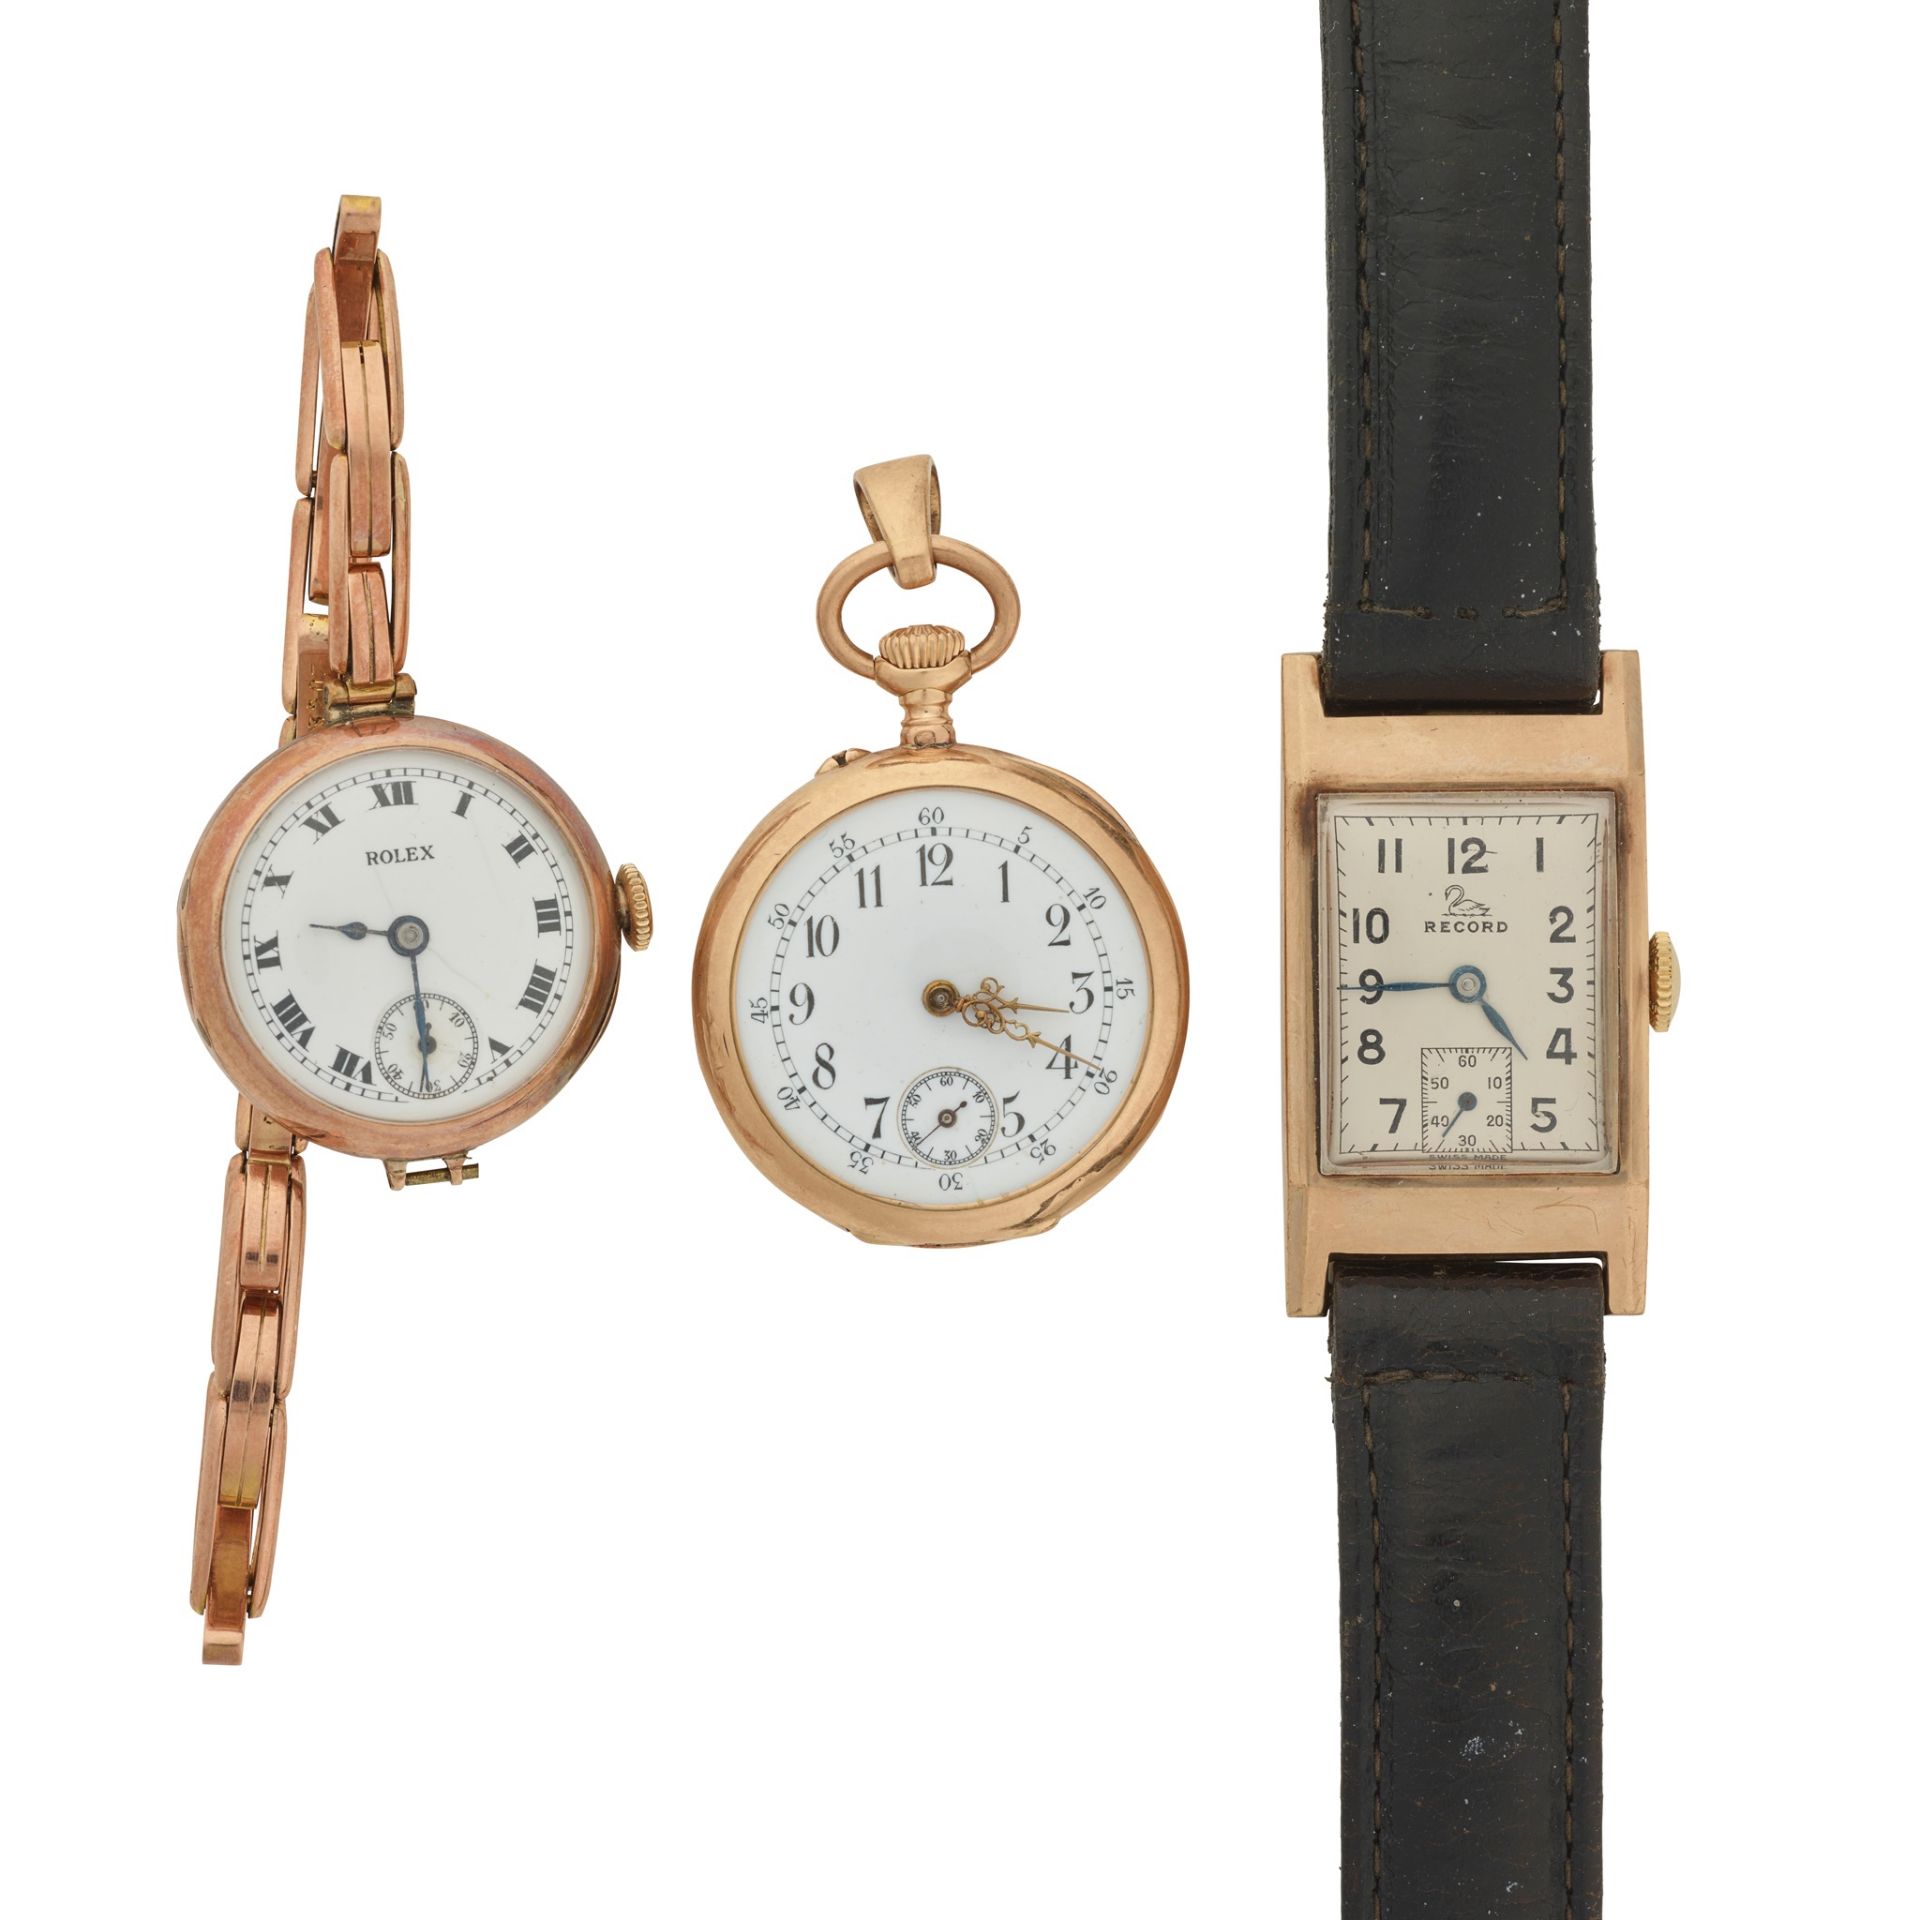 Three early 20th-century watches